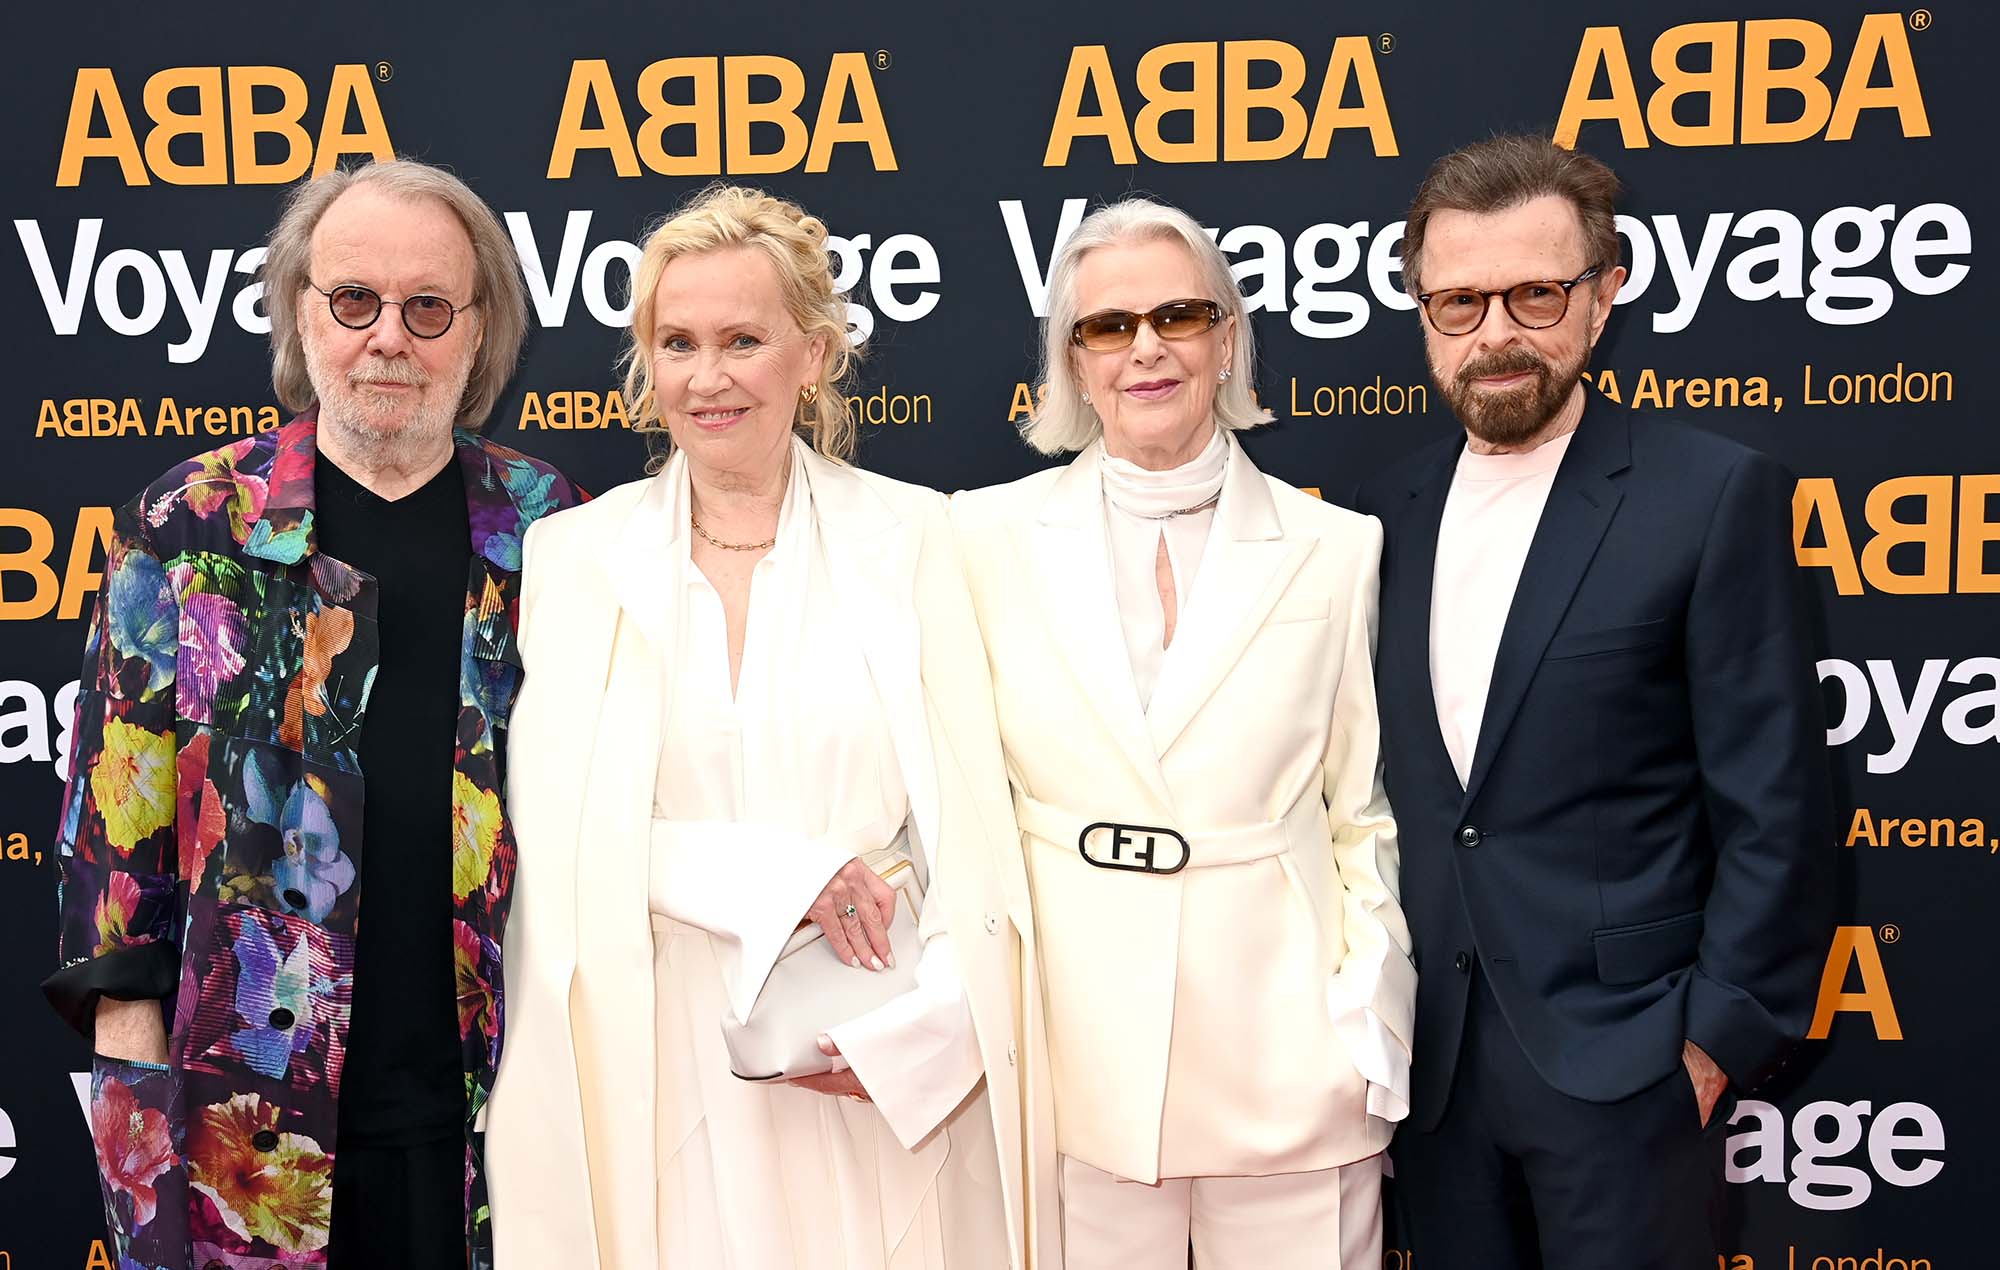 World tour planned for ABBA’s ‘Voyage’ virtual concert experience